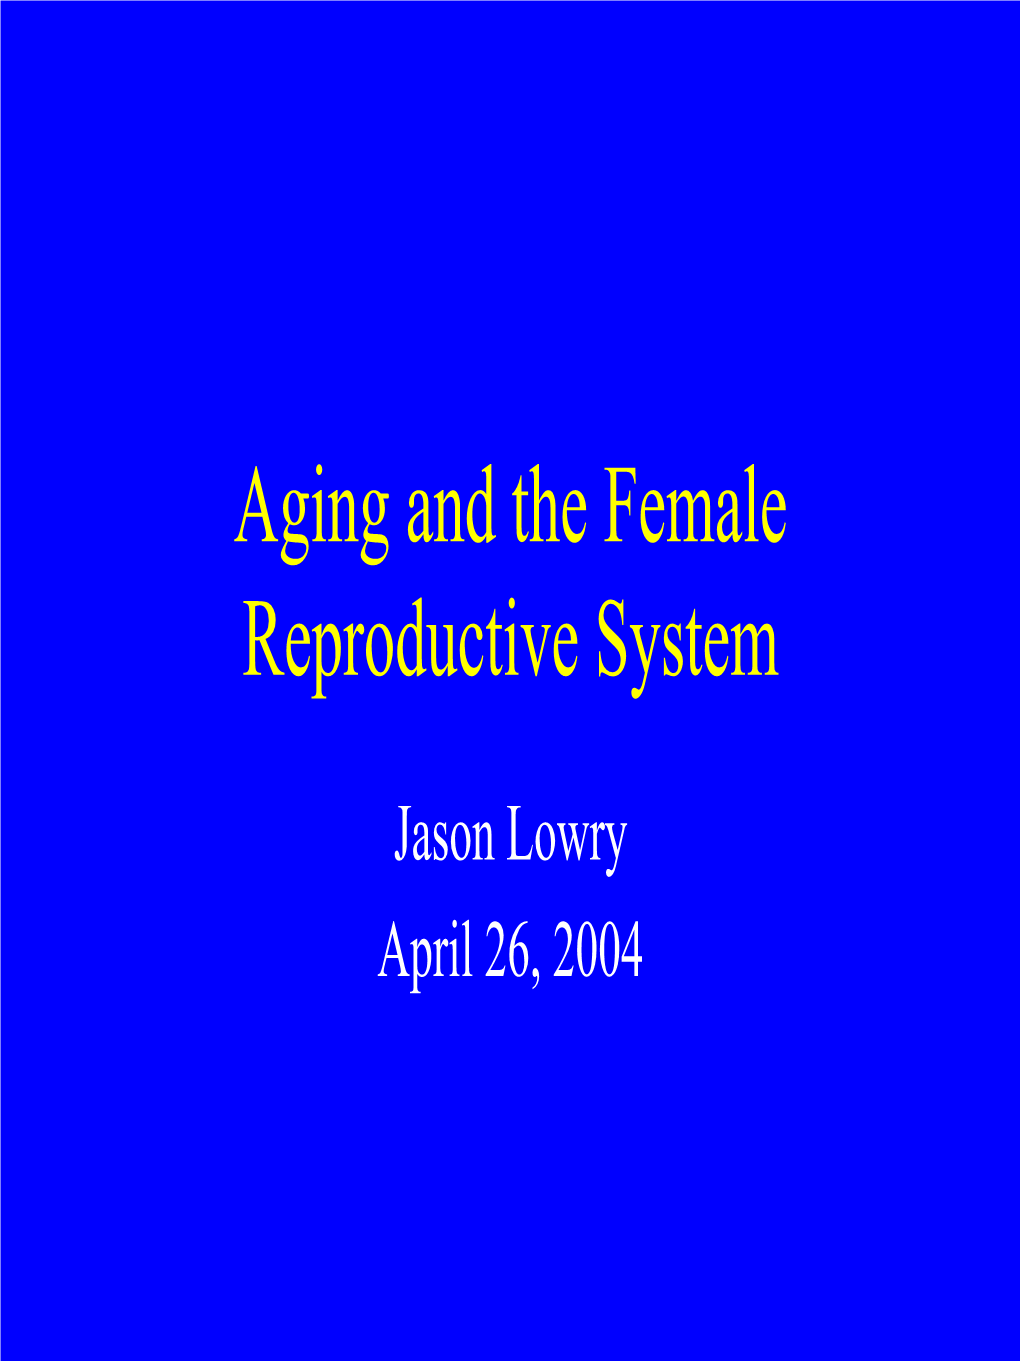 Aging and the Female Reproductive System